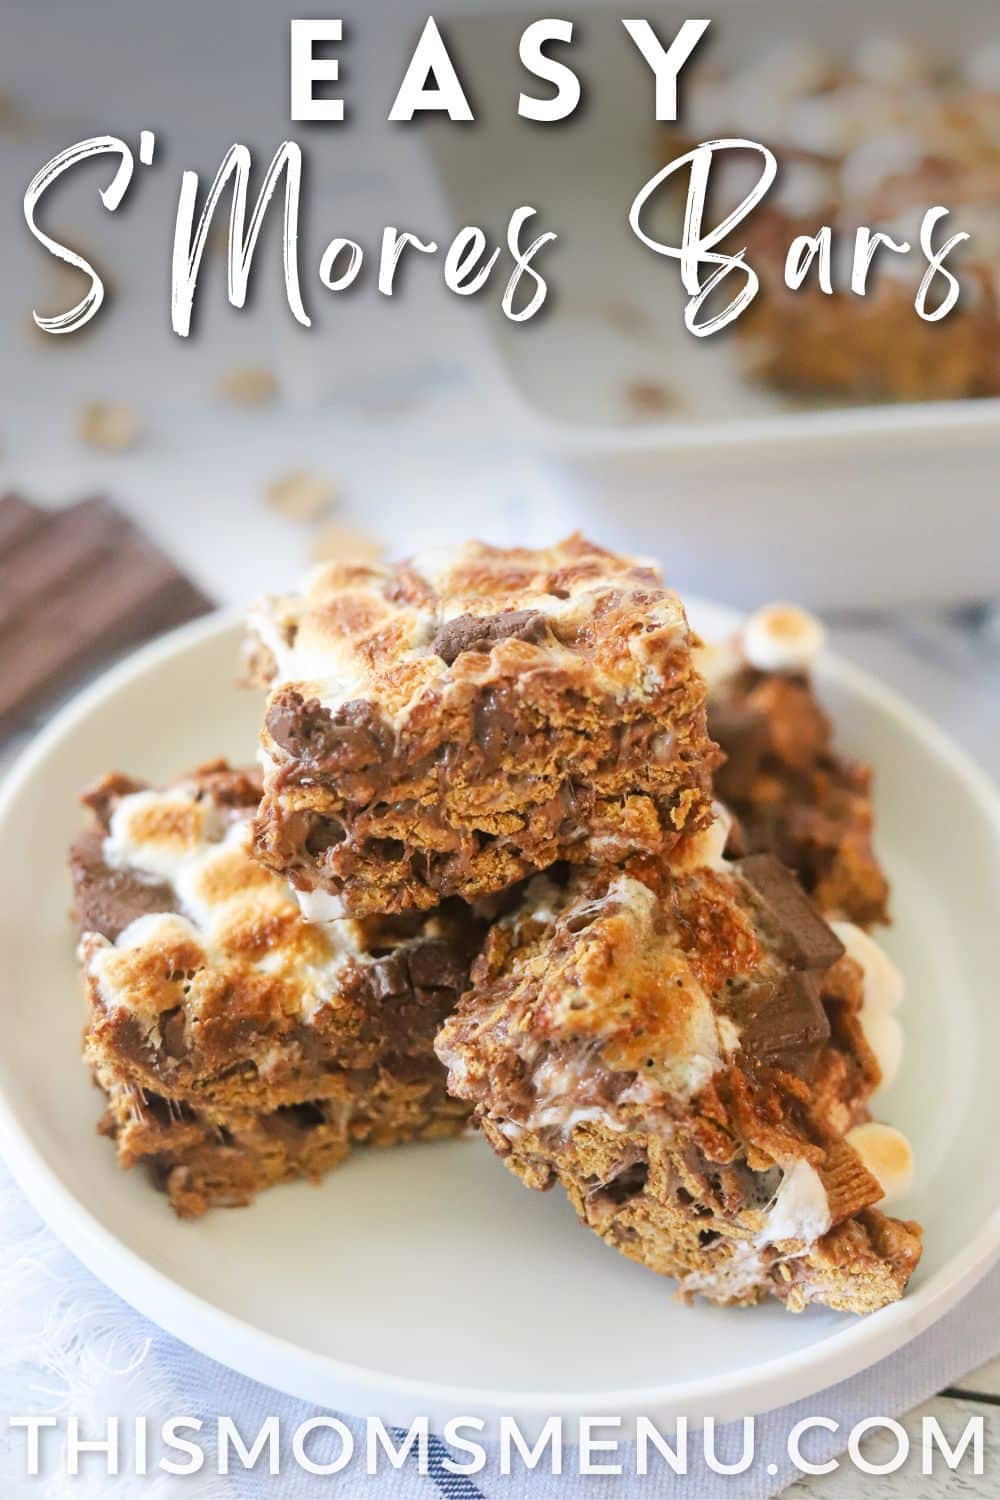 S'more bars on a plate